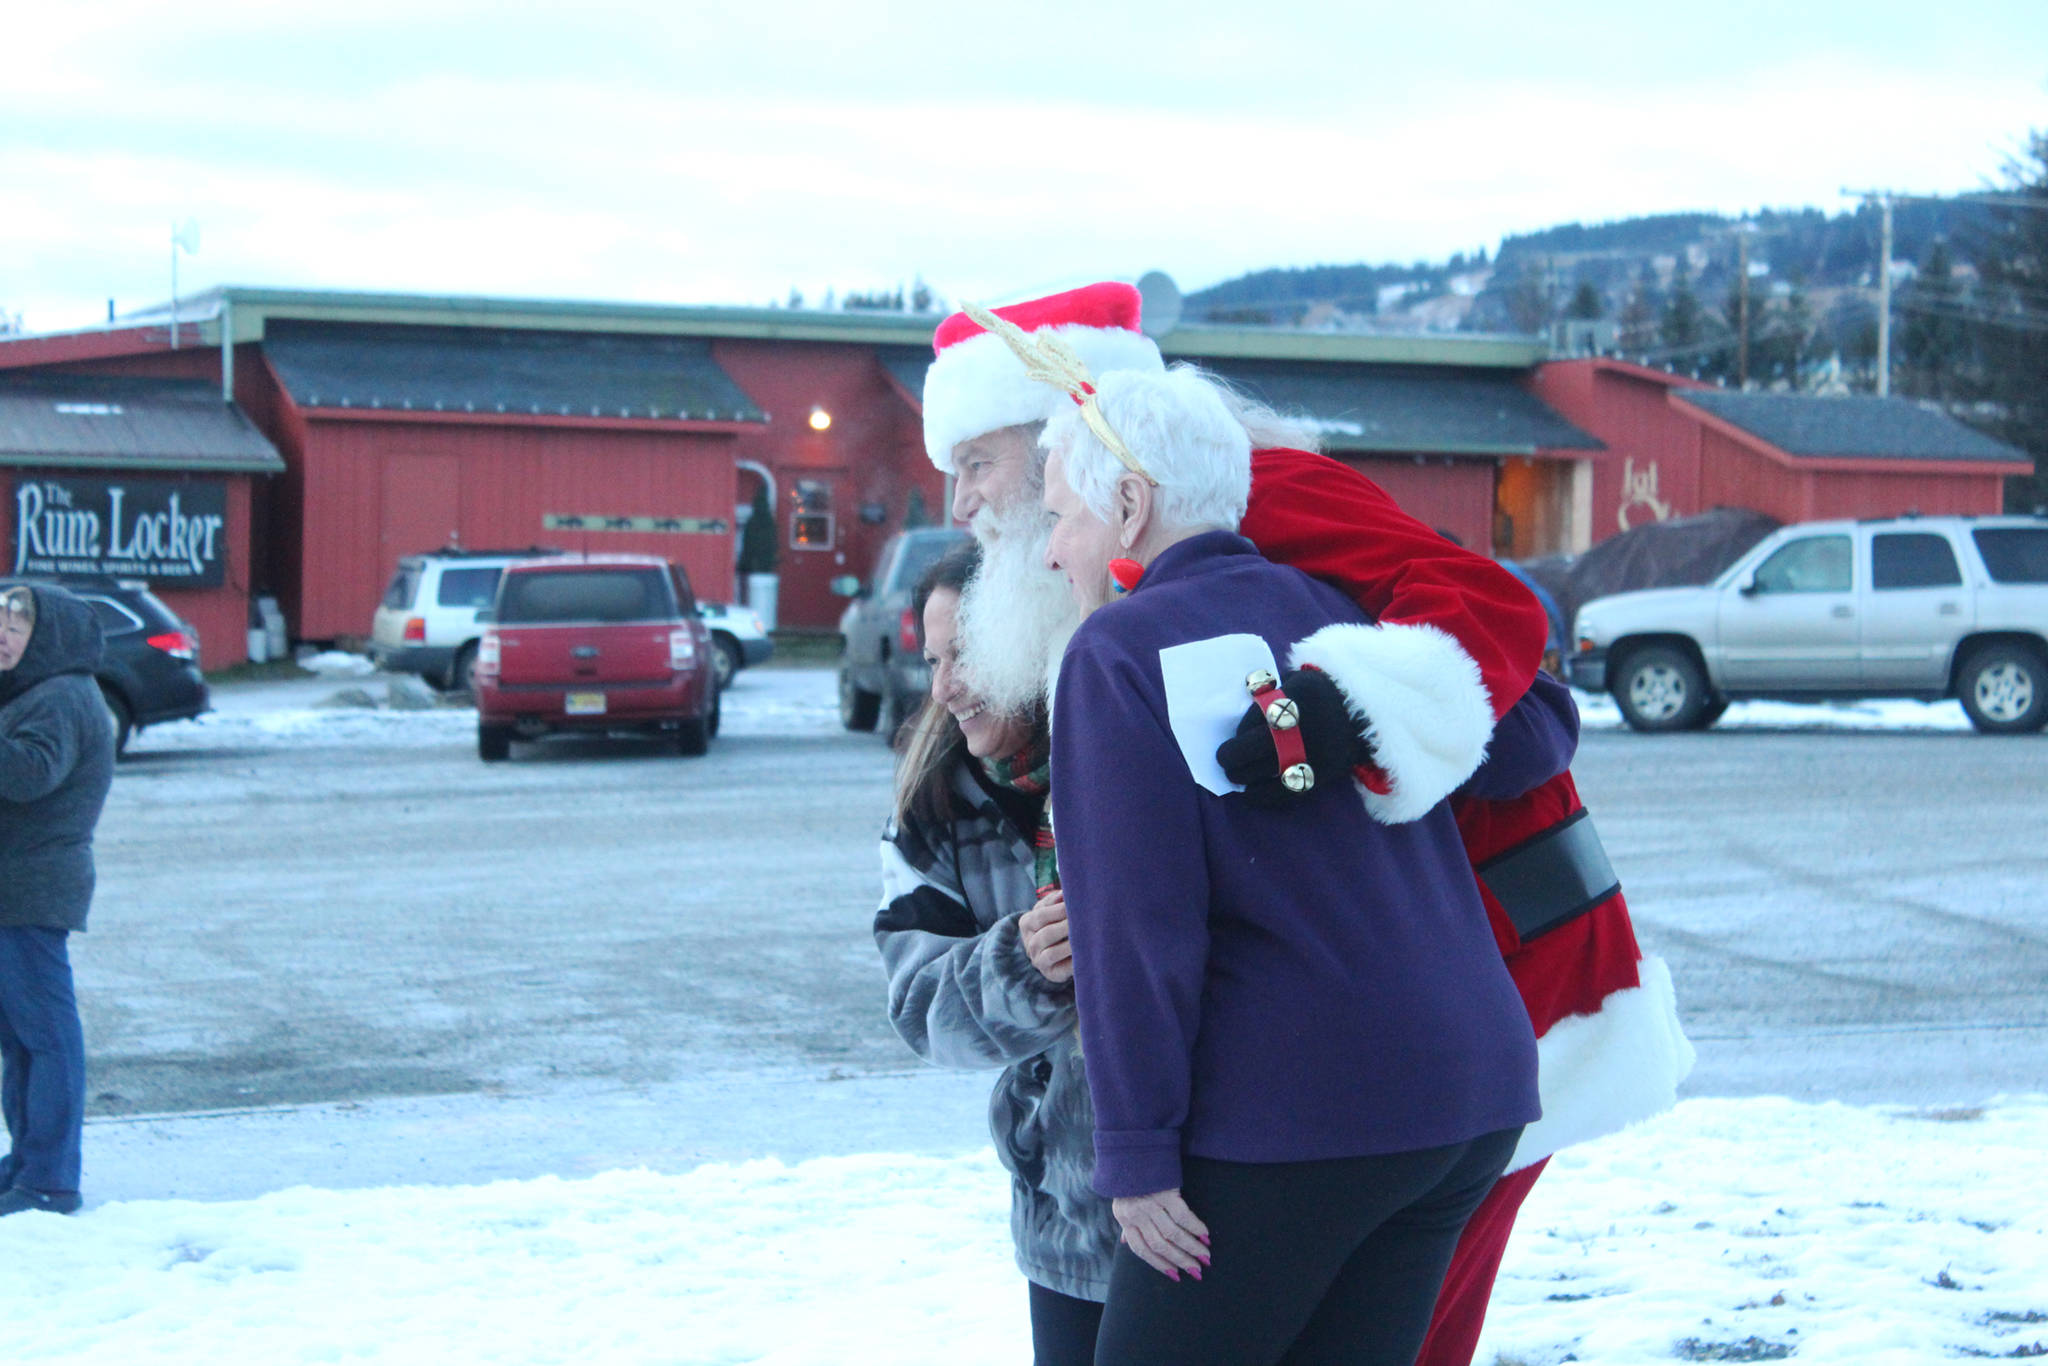 Anchor Point resident Dennis Dustin poses as Santa Clause with attendees of the Homer Chamber of Commerce holiday tree lighting event Friday, Dec. 1, 2017 in Homer, Alaska. Dustin and his wife, Marcella, have been volunteering as Mr. and Mrs. Clause since the Chamber event began. (Photo by Megan Pacer/Homer News)